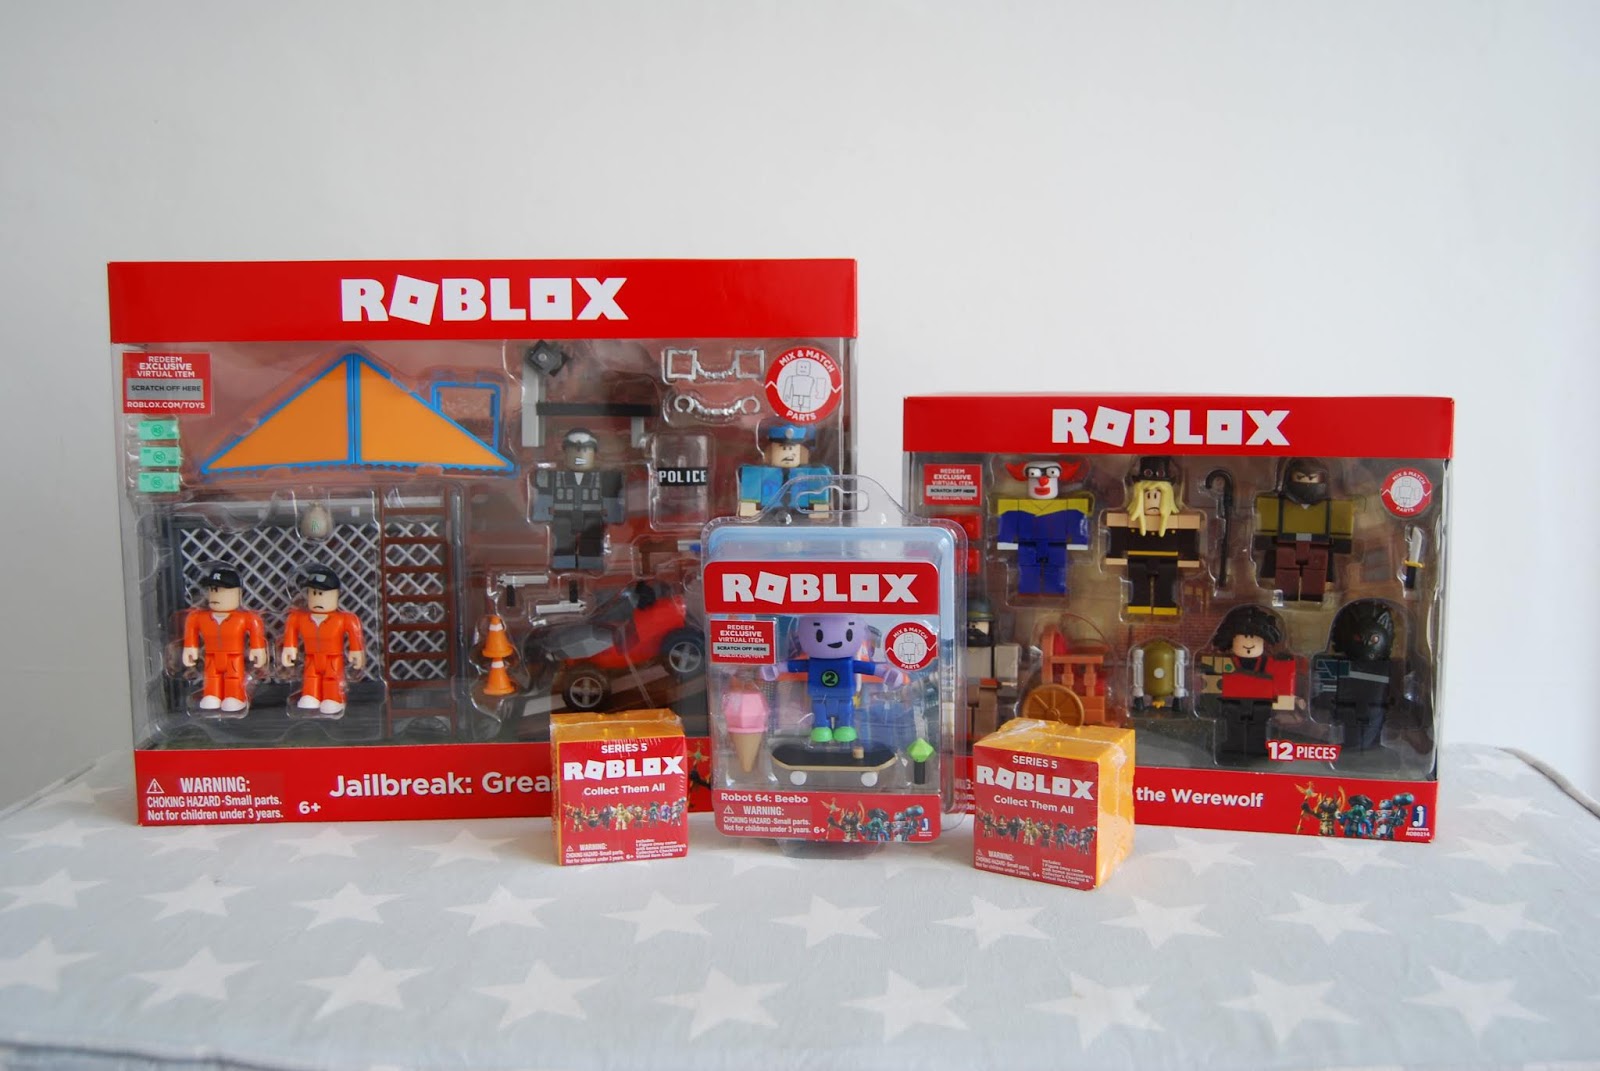 Chic Geek Diary Roblox Series 5 Toys Review Giveaway - roblox wheelchair accessory